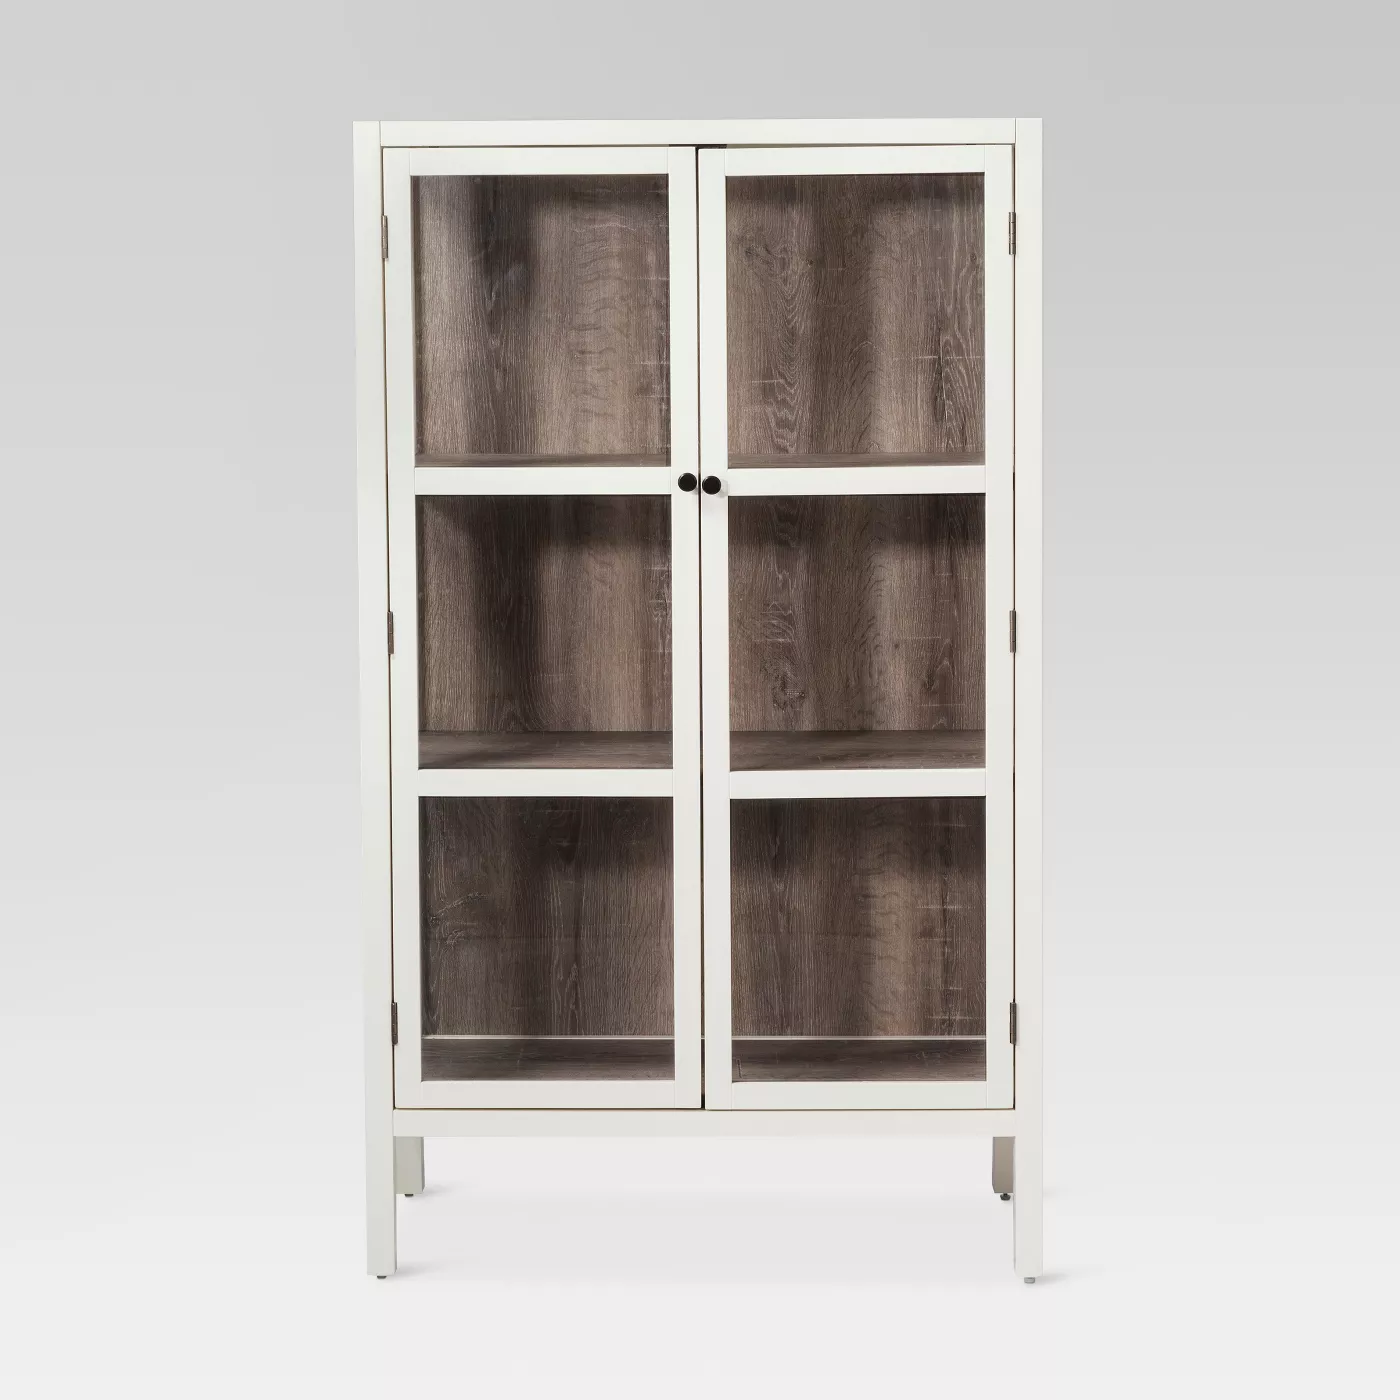 Shop 56.2" Hadley Library Cabinet with Glass Shell White - Threshold™ from Target on Openhaus